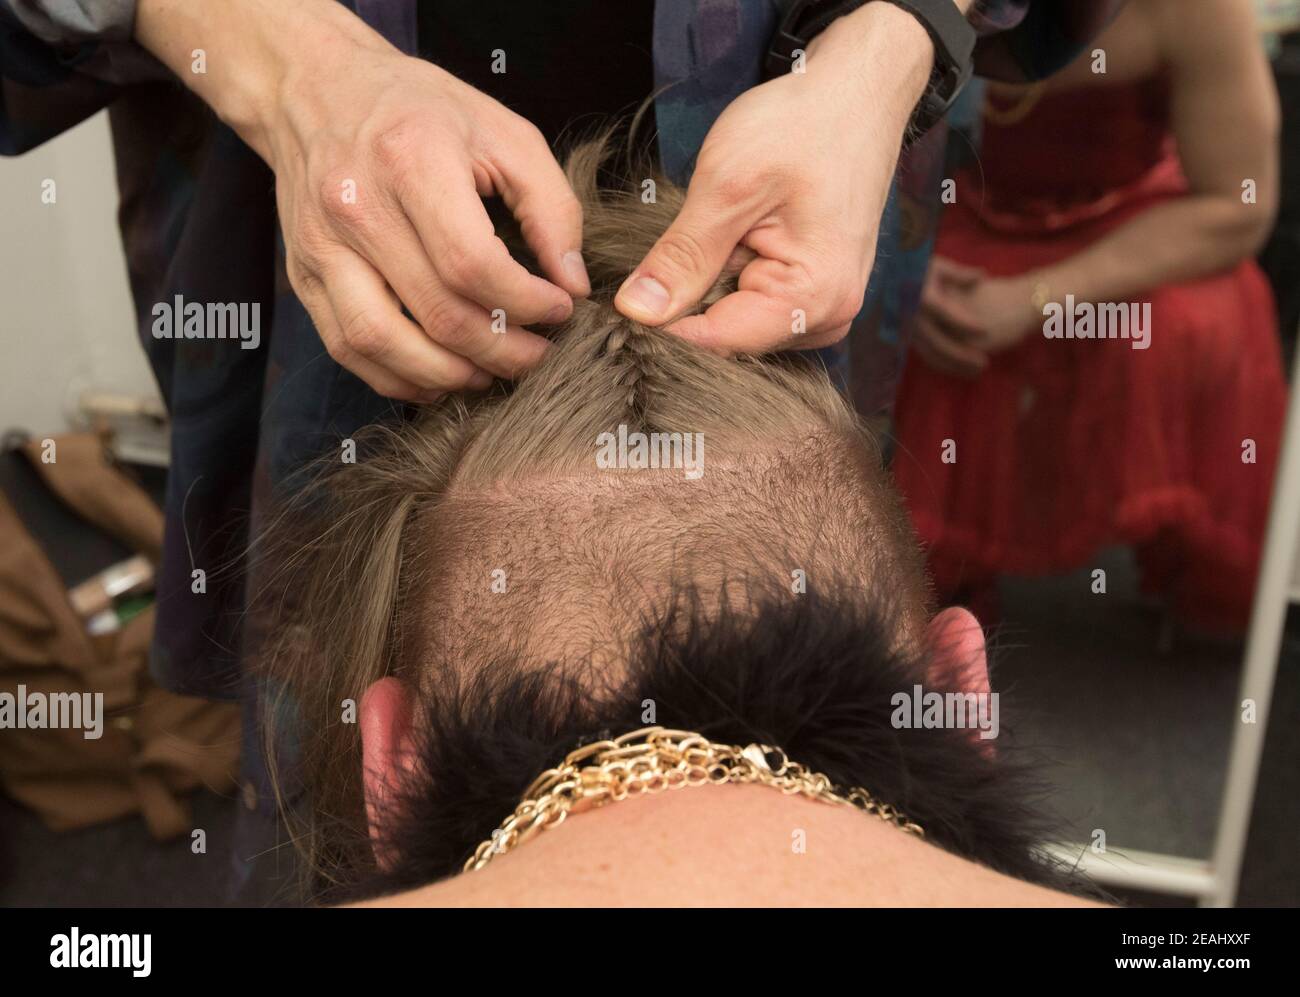 hair styling at the hairdresser Stock Photo